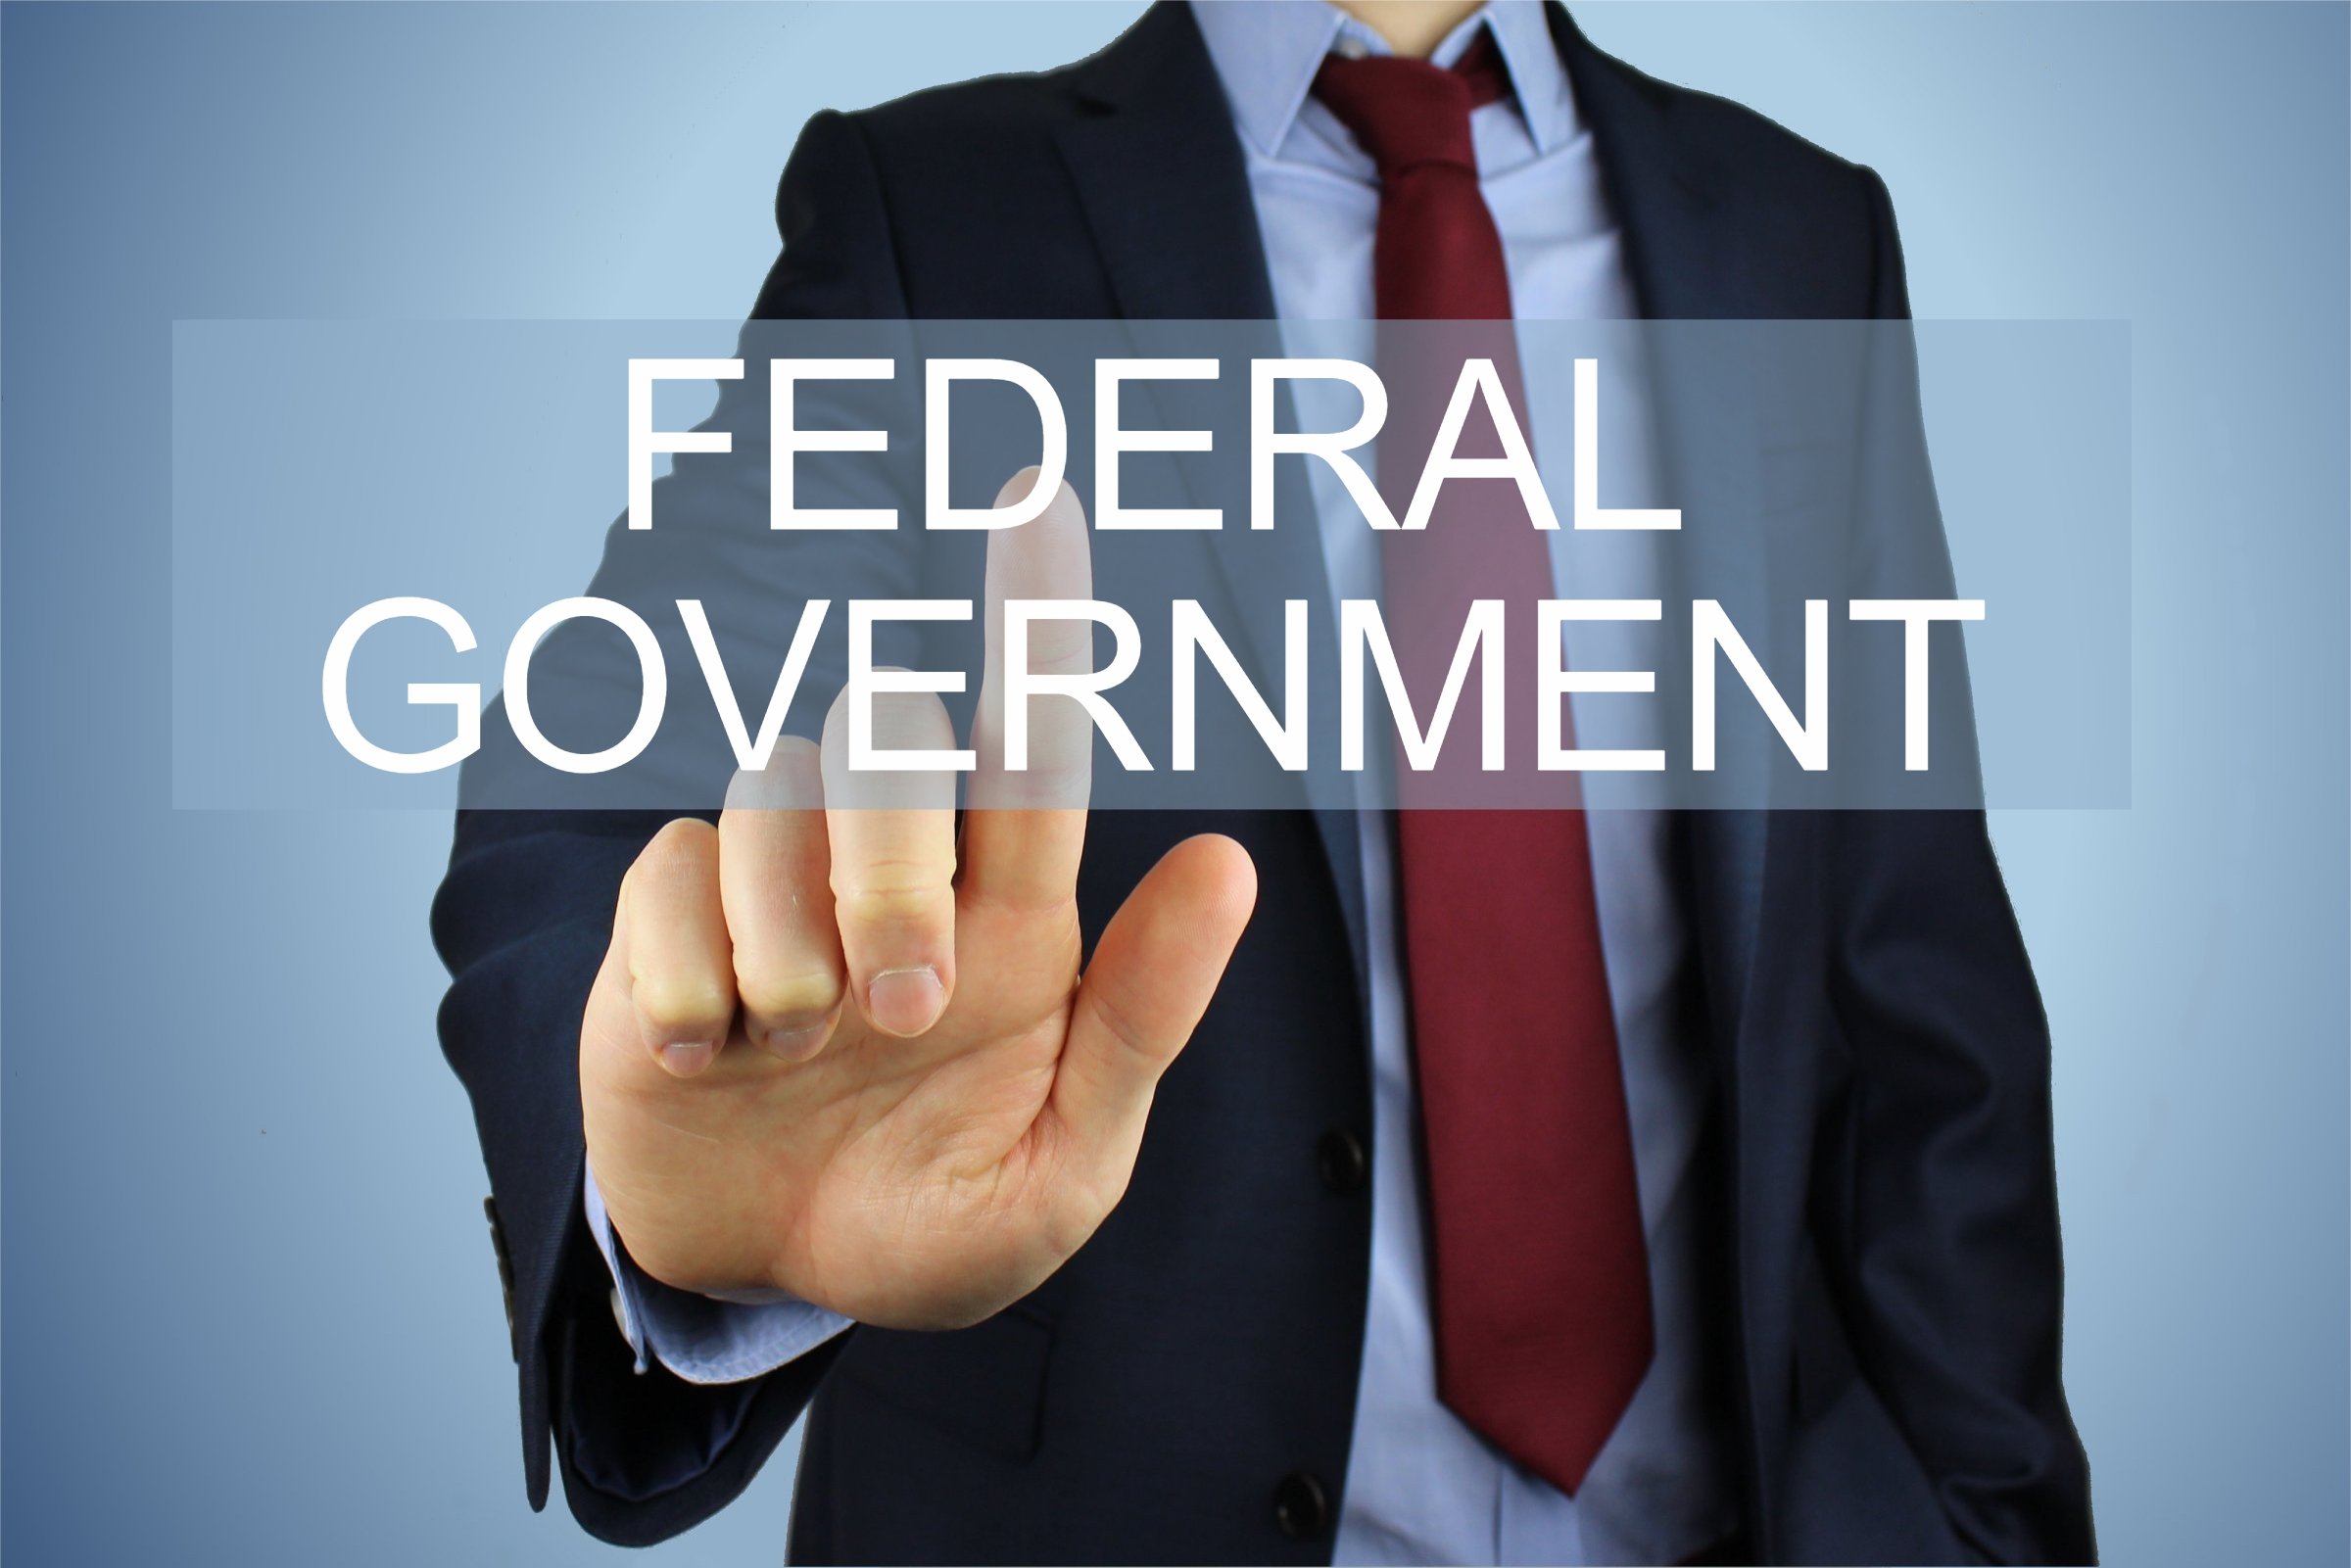 federal government